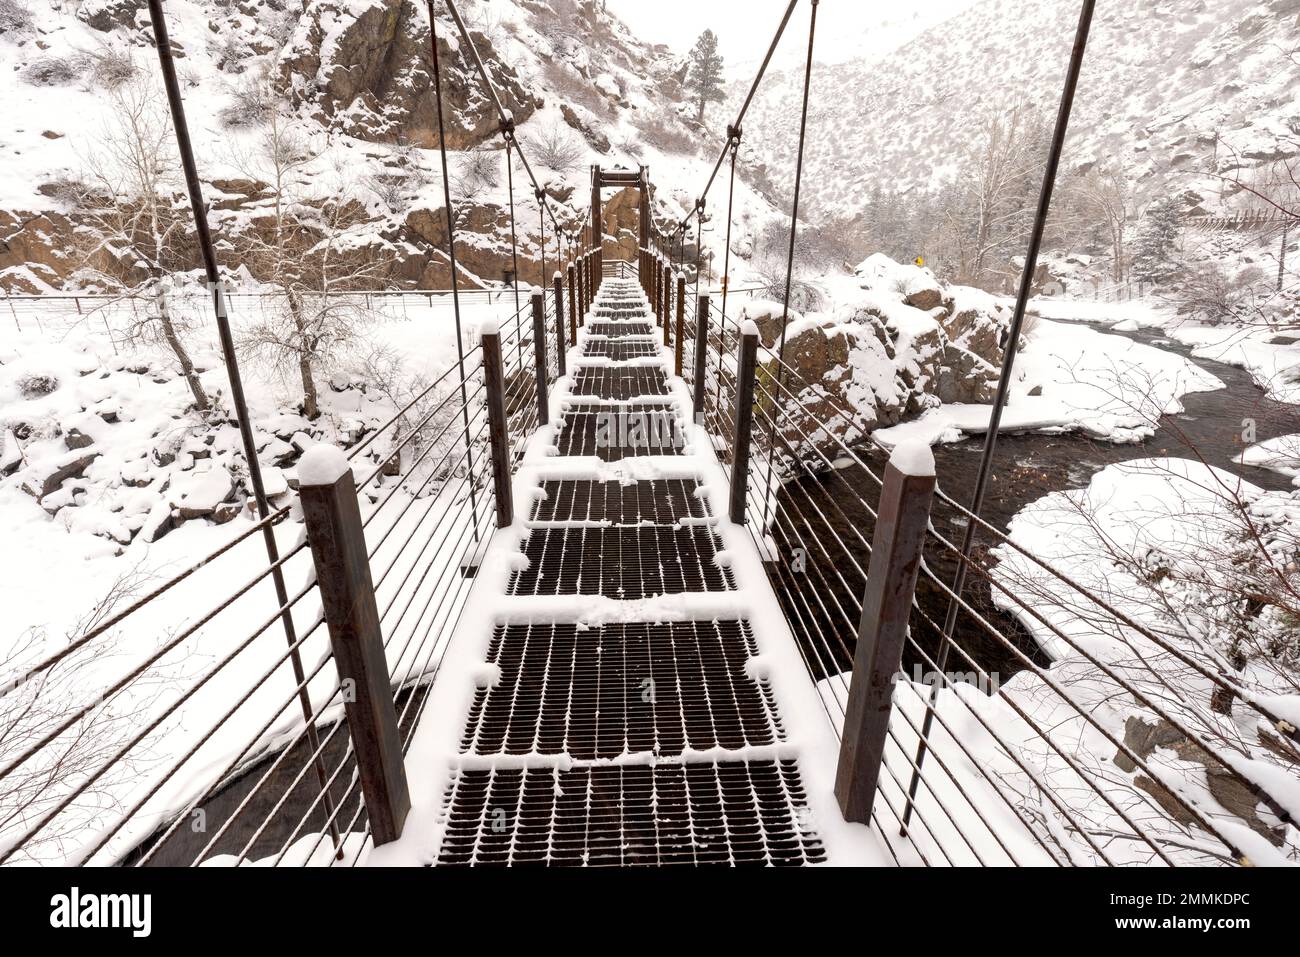 Snow-covered suspension bridge on Welch Ditch Trail in Clear Creek Canyon. Part of the Peaks to Plains Trail - near Golden, Colorado, USA Stock Photo